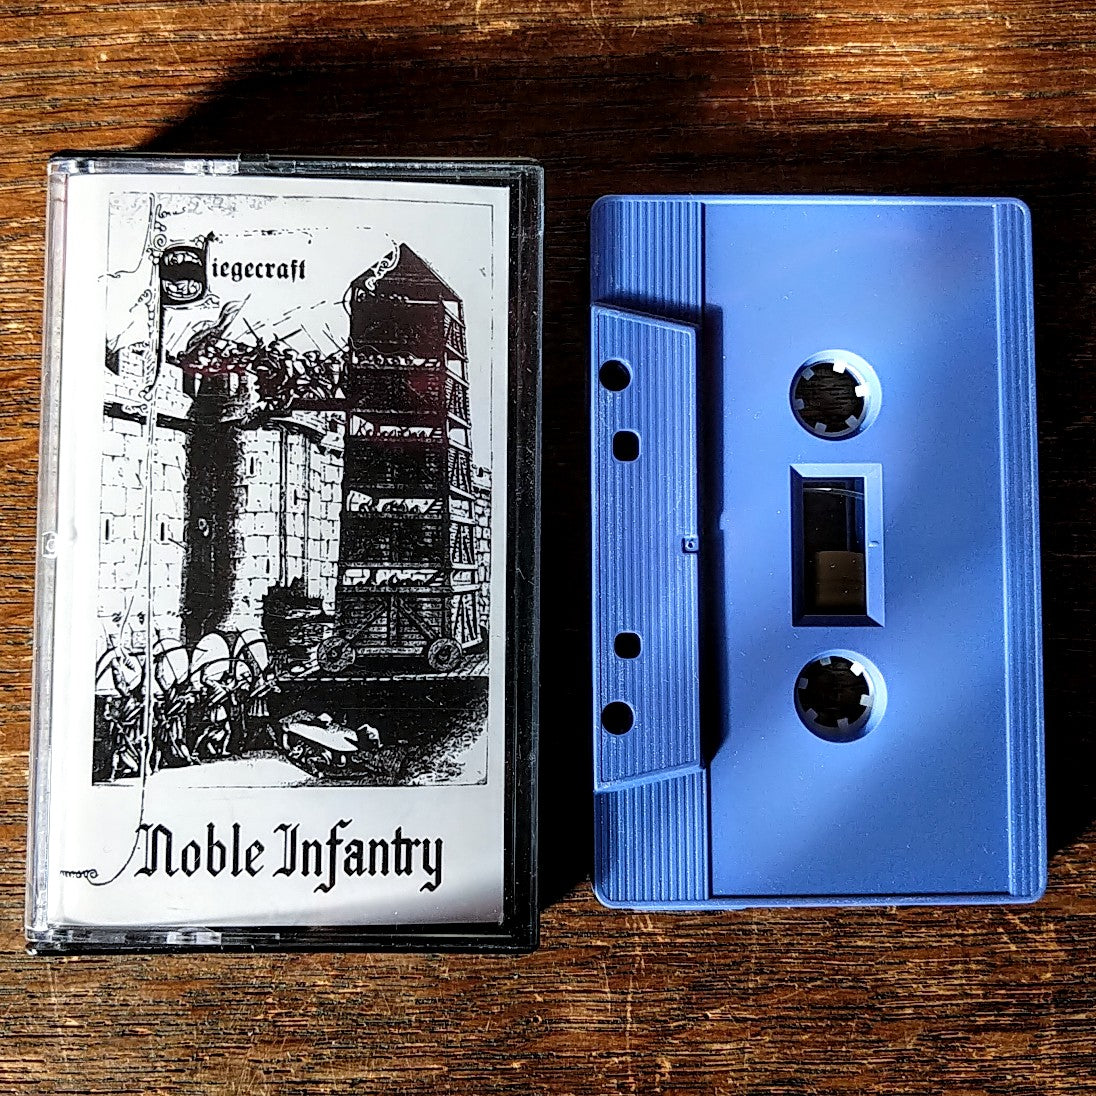 [SOLD OUT] SIEGECRAFT "Noble Infantry" Cassette Tape